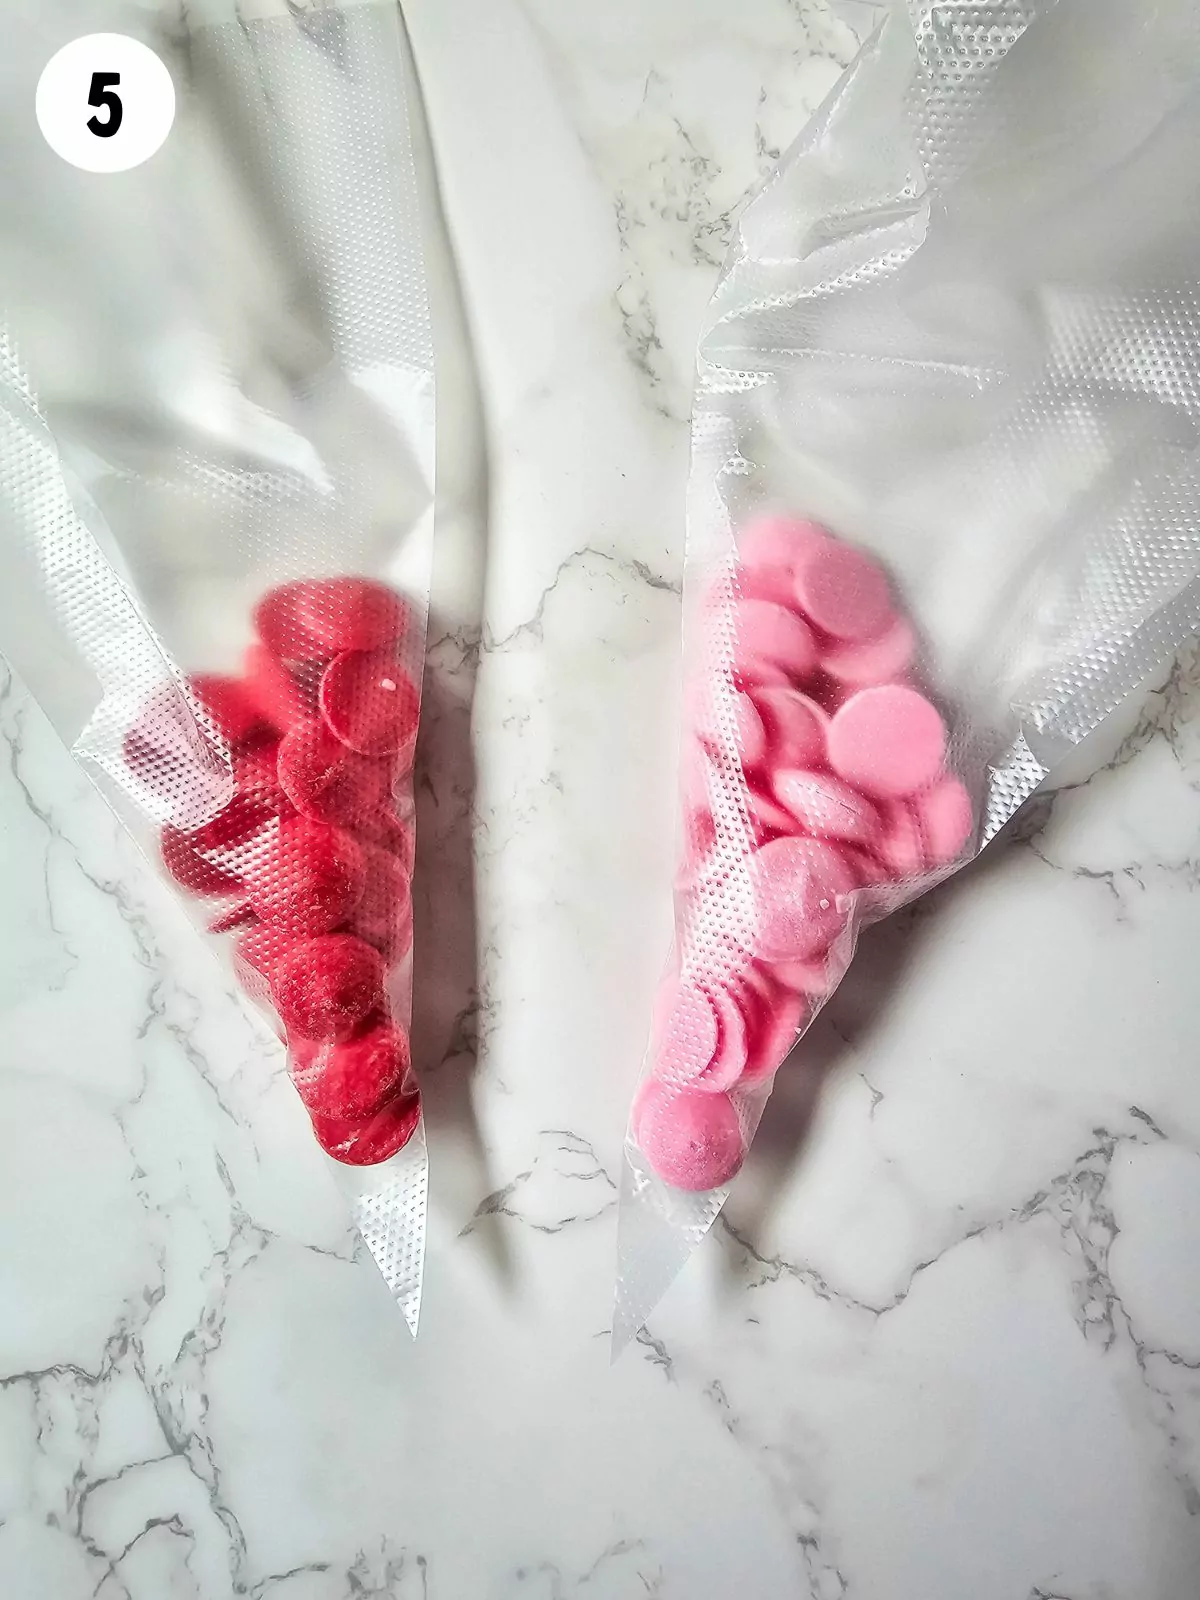 Pink and red candy melts in piping bags.